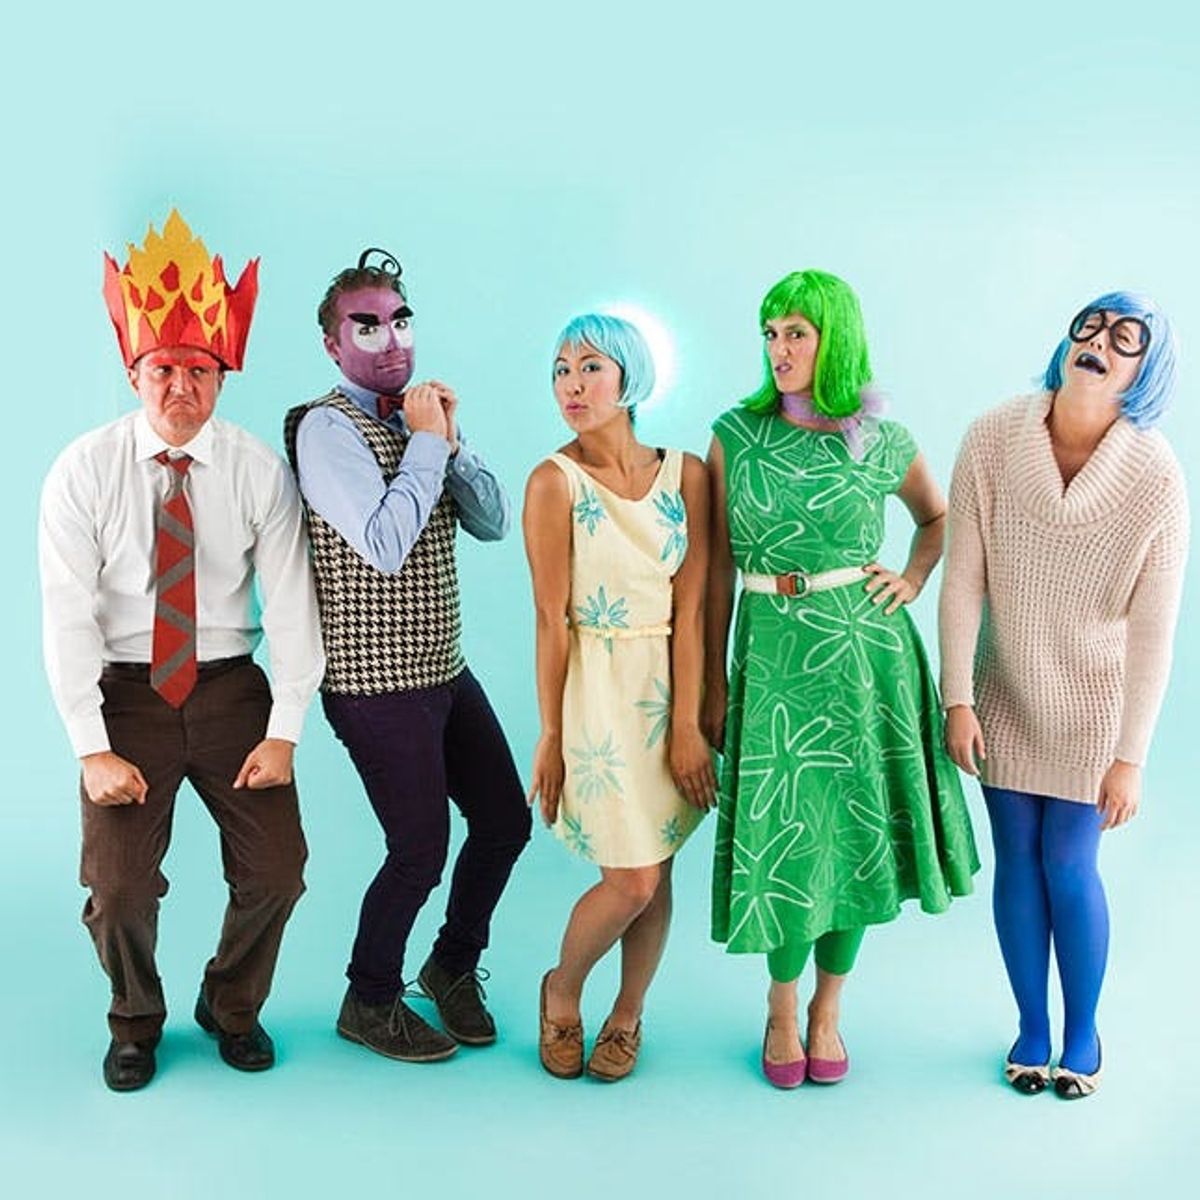 How to Make Inside Out Characters for an Epic Group Halloween Costume